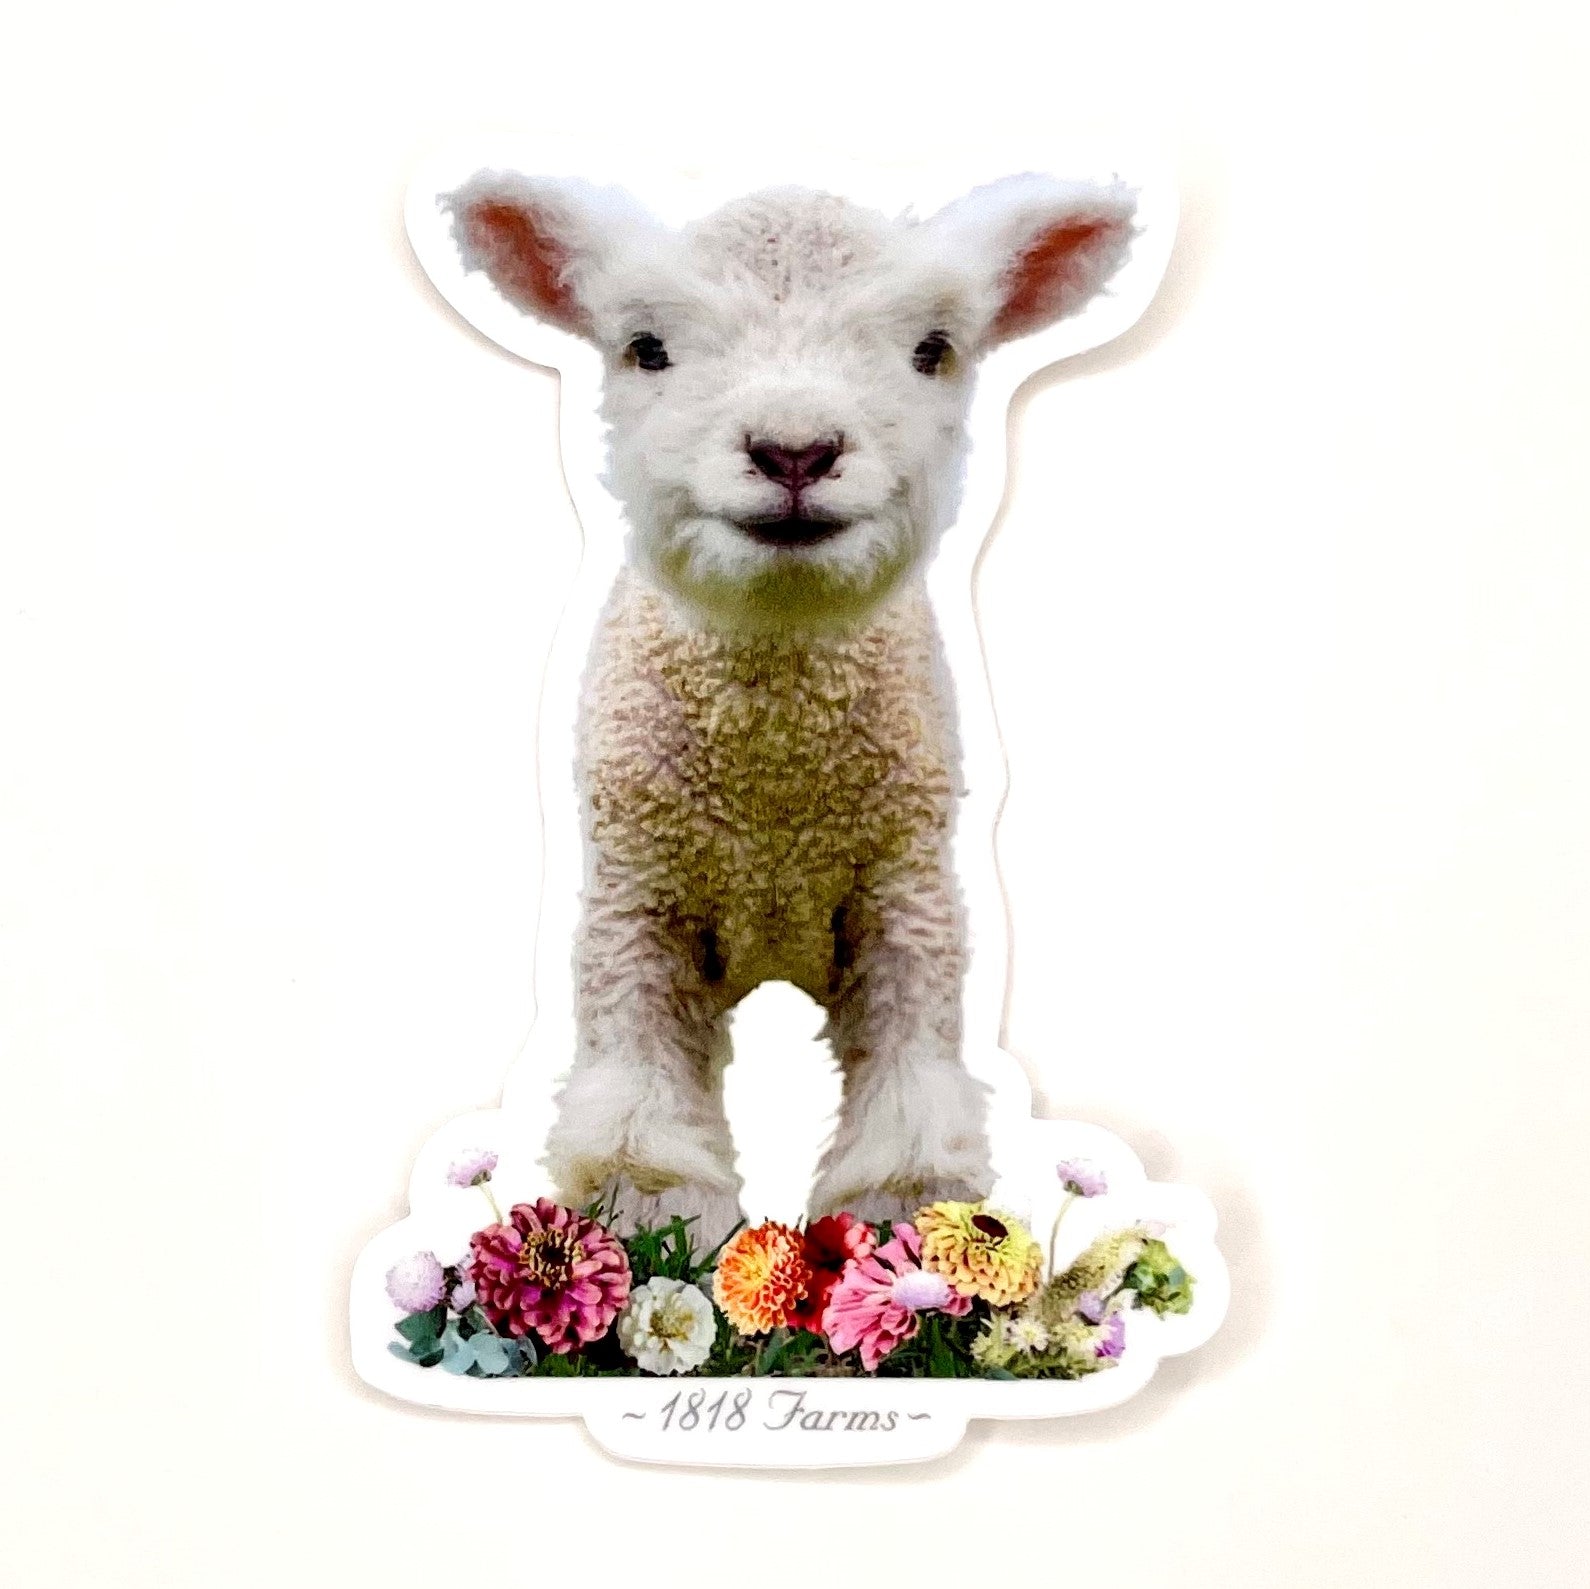 Sticker - Lamb with Flowers  1818 Farms   